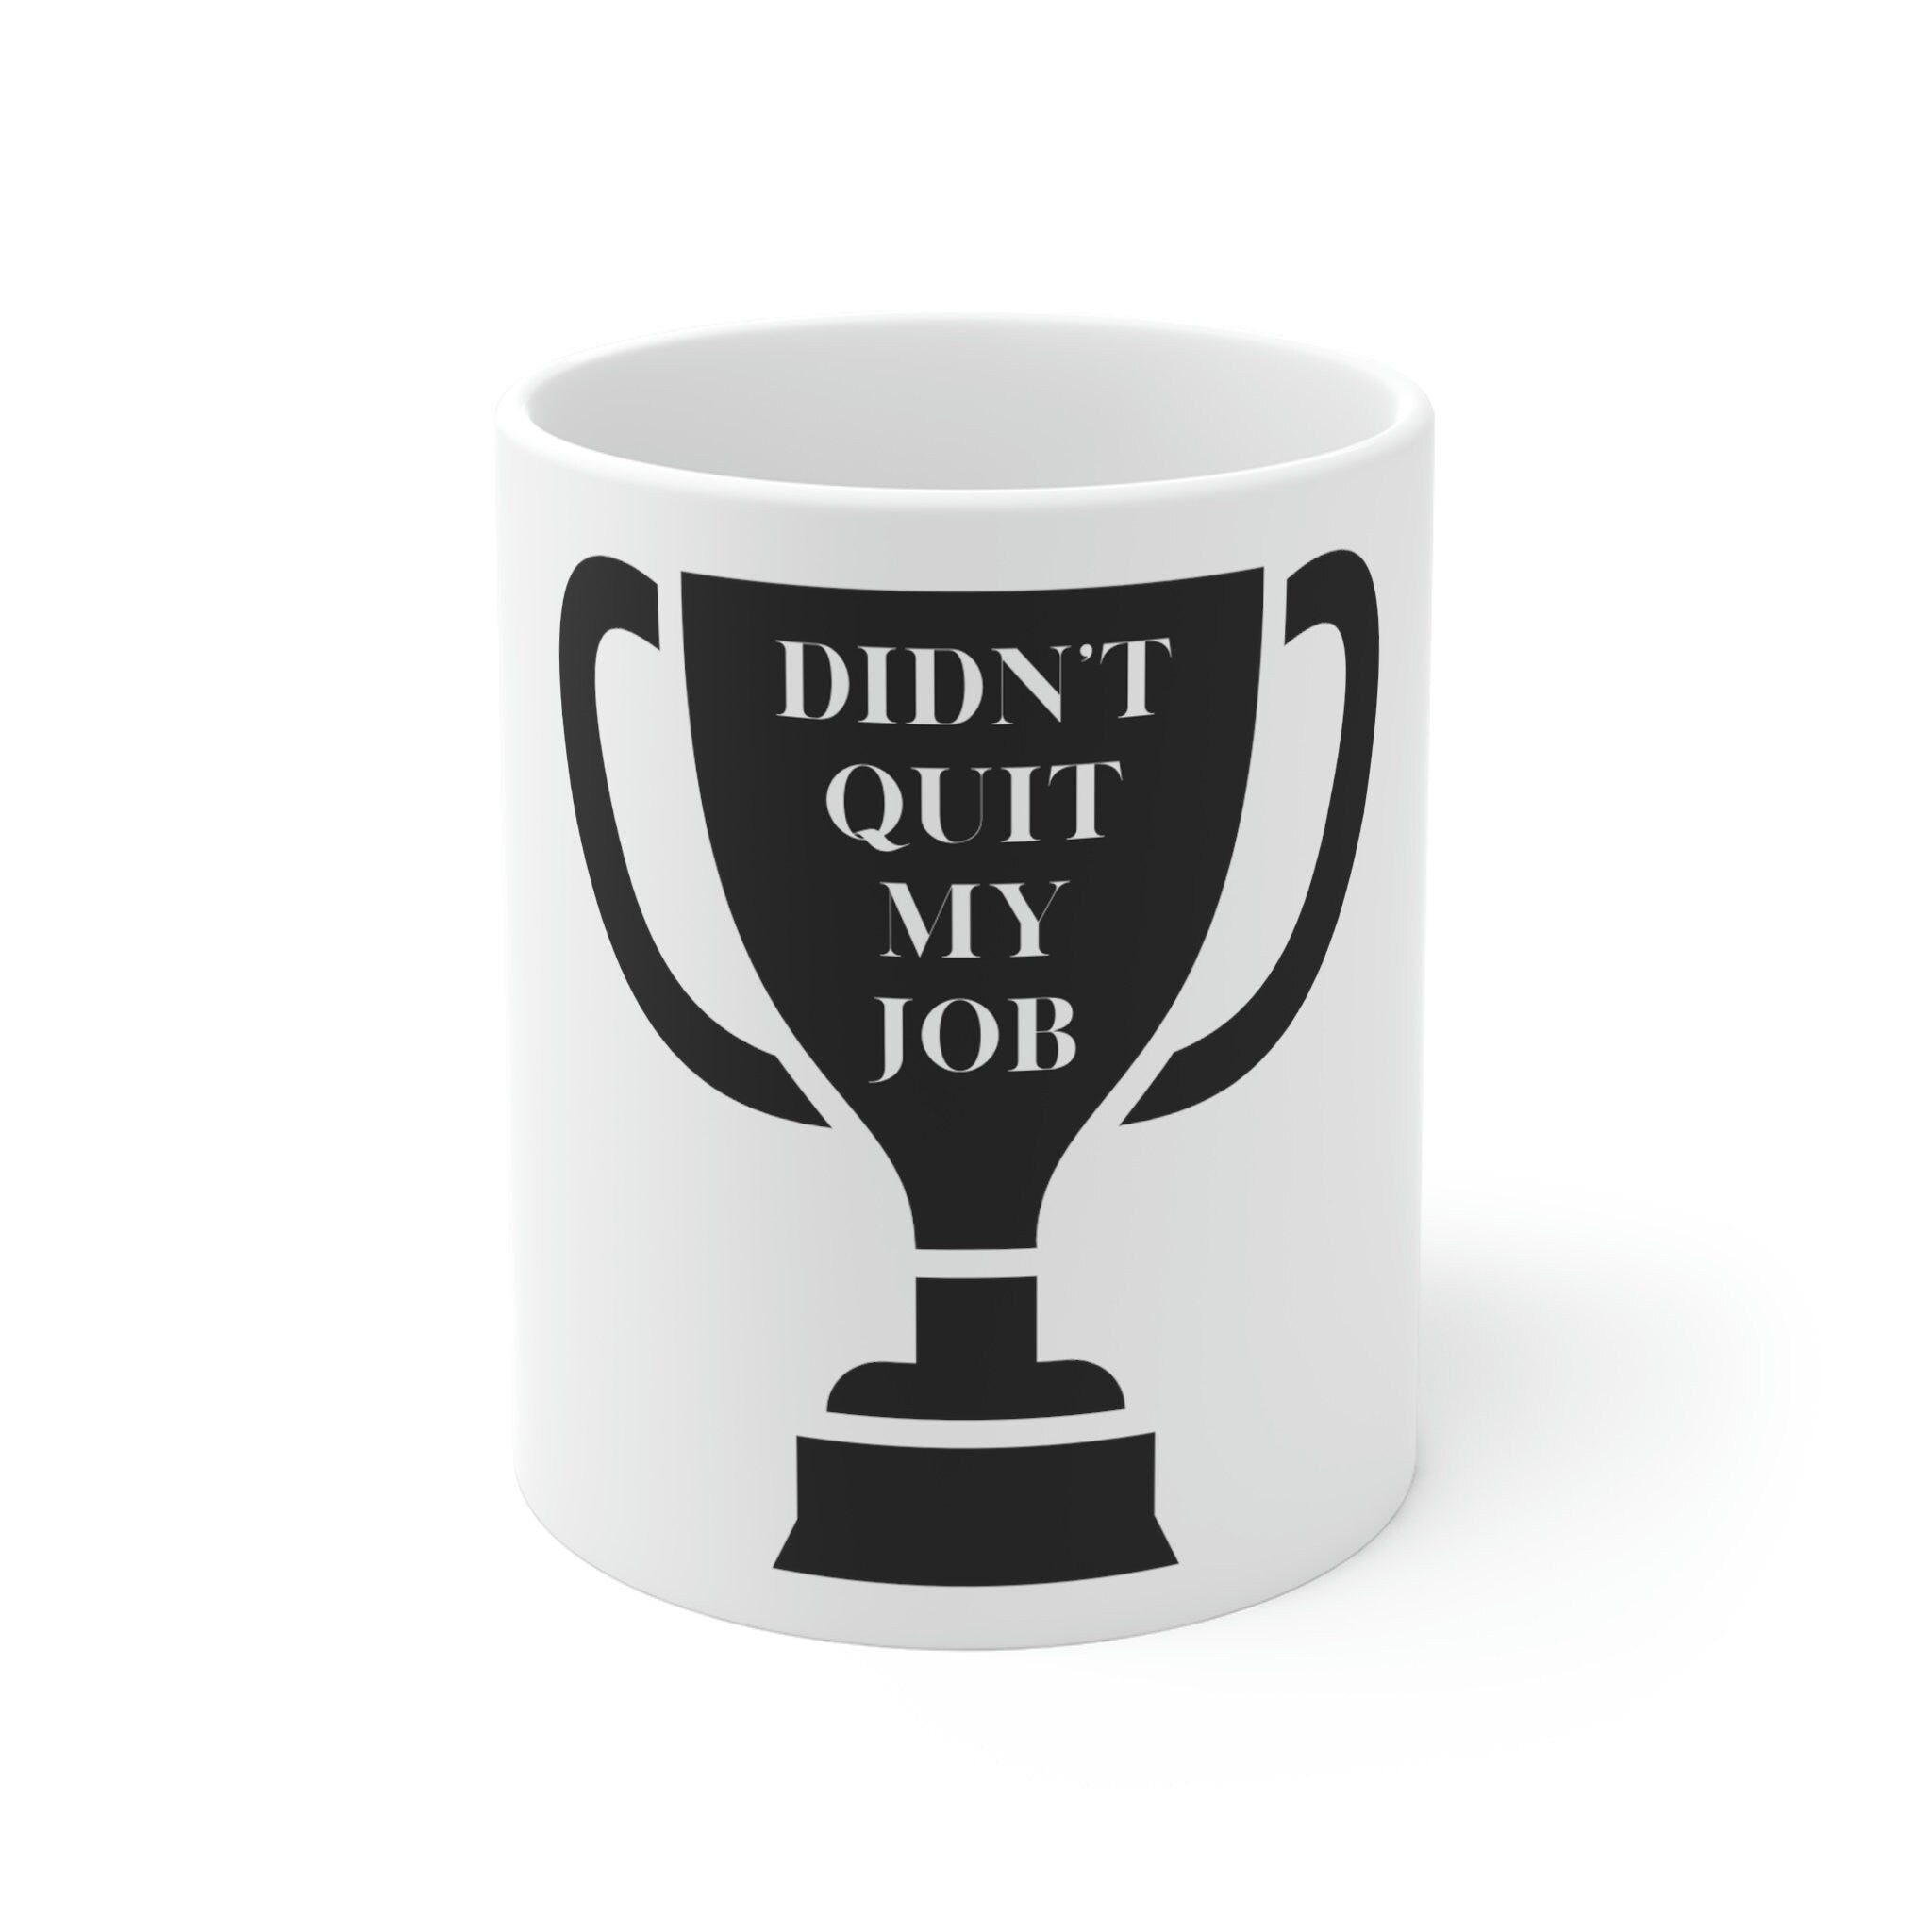 https://gatheringlittles.com/cdn/shop/products/gifts-for-new-moms-coffee-mug-funny-new-mom-gift-coffee-mugs-for-new-moms-didnt-quit-my-job-muggifts-for-new-moms-820256.jpg?v=1691073363&width=3840